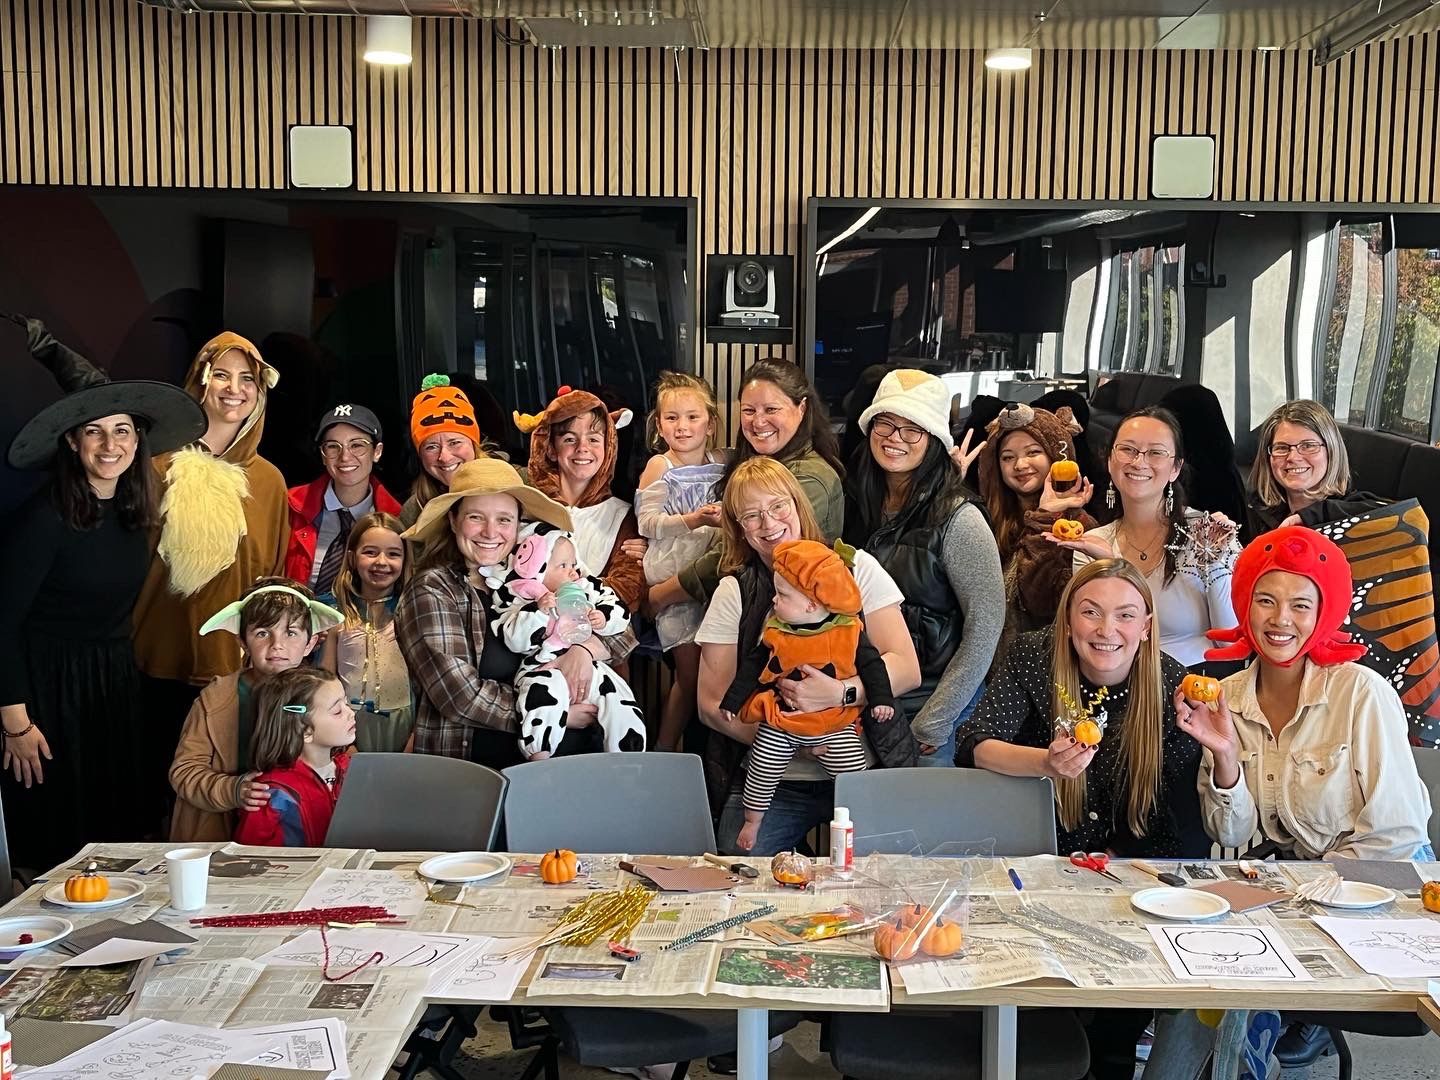 Employees and families dressed up for Halloween